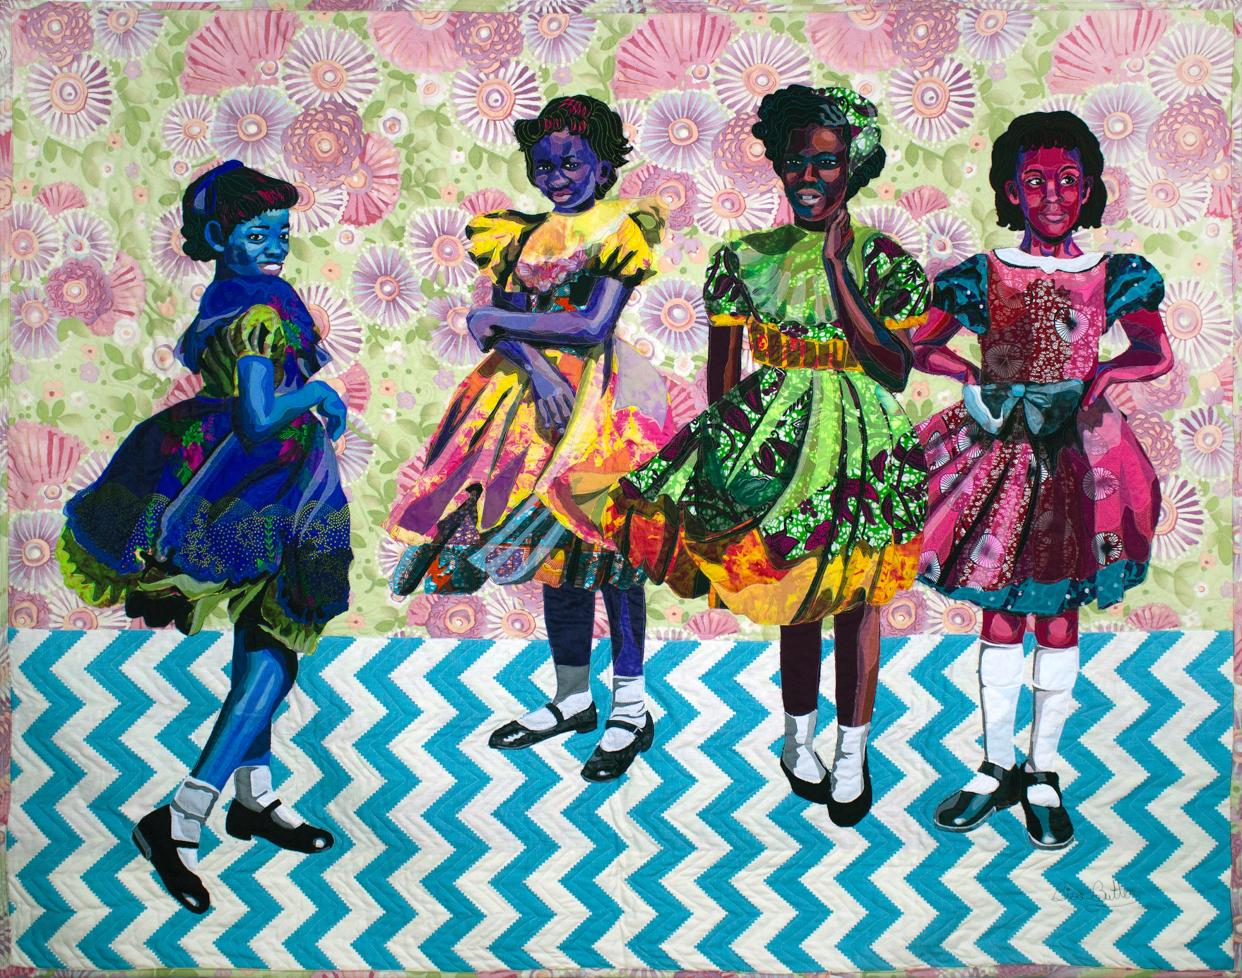 Made from cotton, silk, and lace, Bisa Butler's quilt "Four Little Girls, September 15, 1963" remembers the victims of the 16th Street Baptist Church bombing in Birmingham, Alabama.